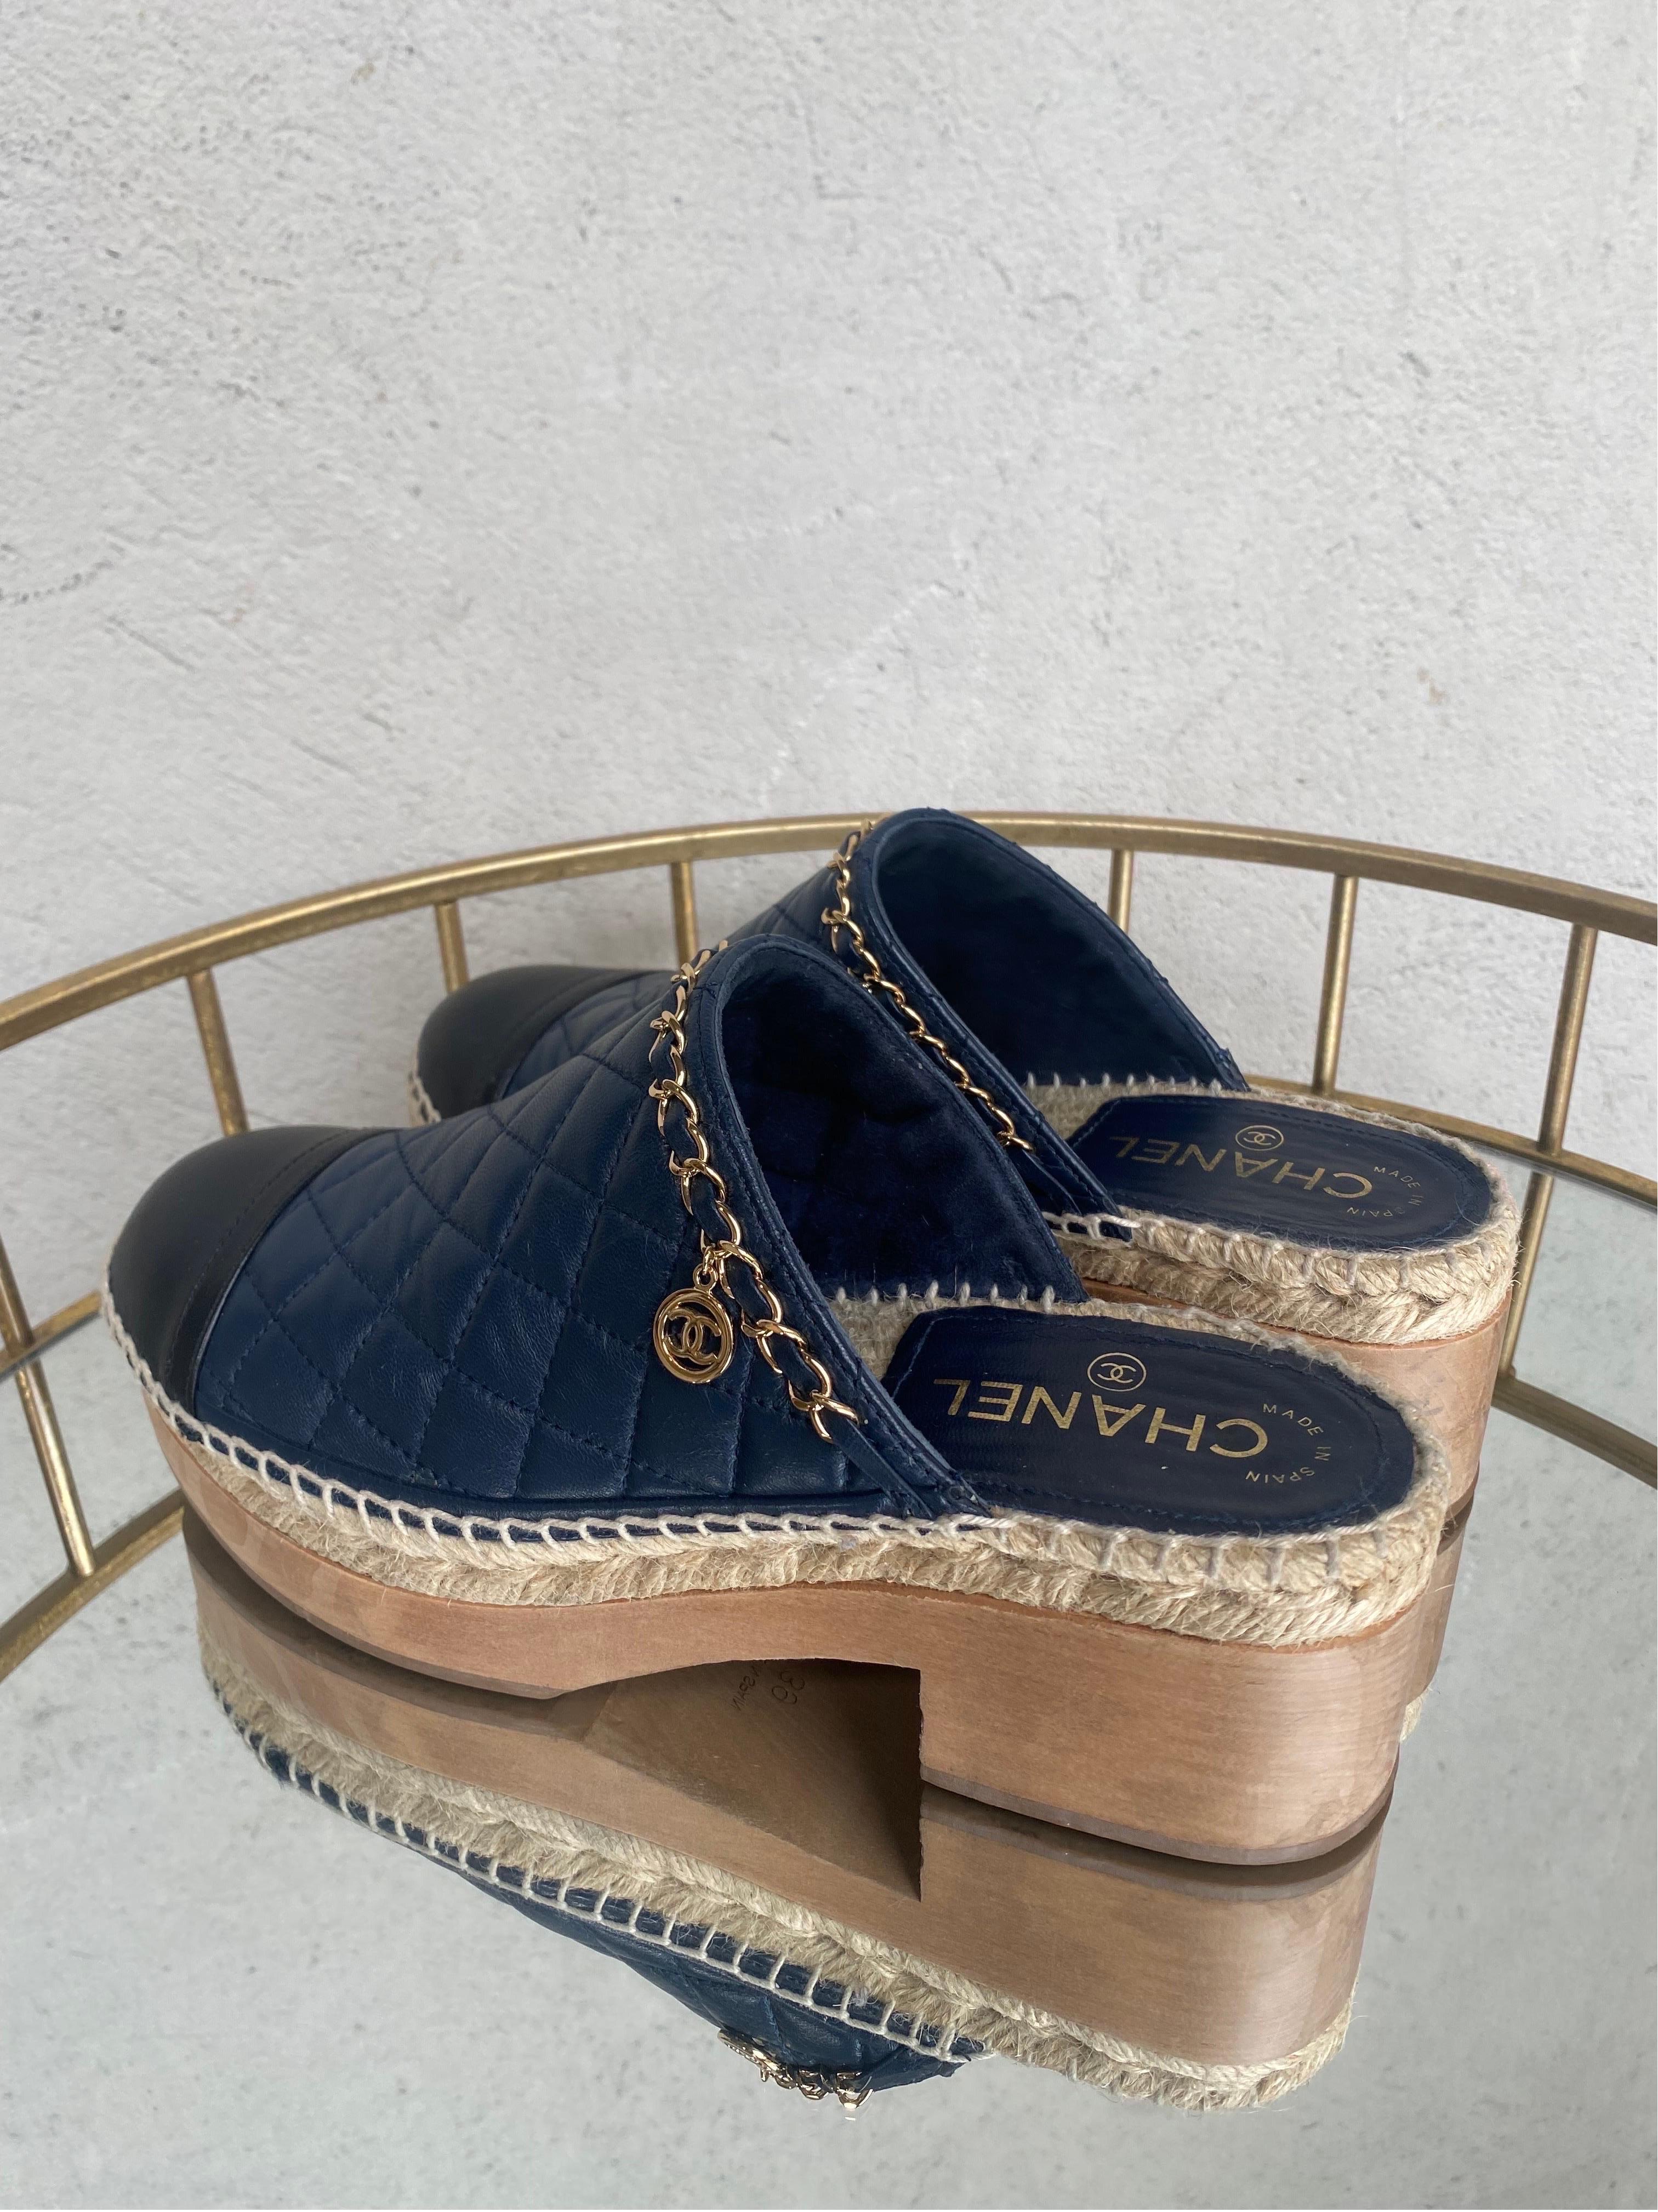 Mules clogs Chanel In Excellent Condition For Sale In Carnate, IT